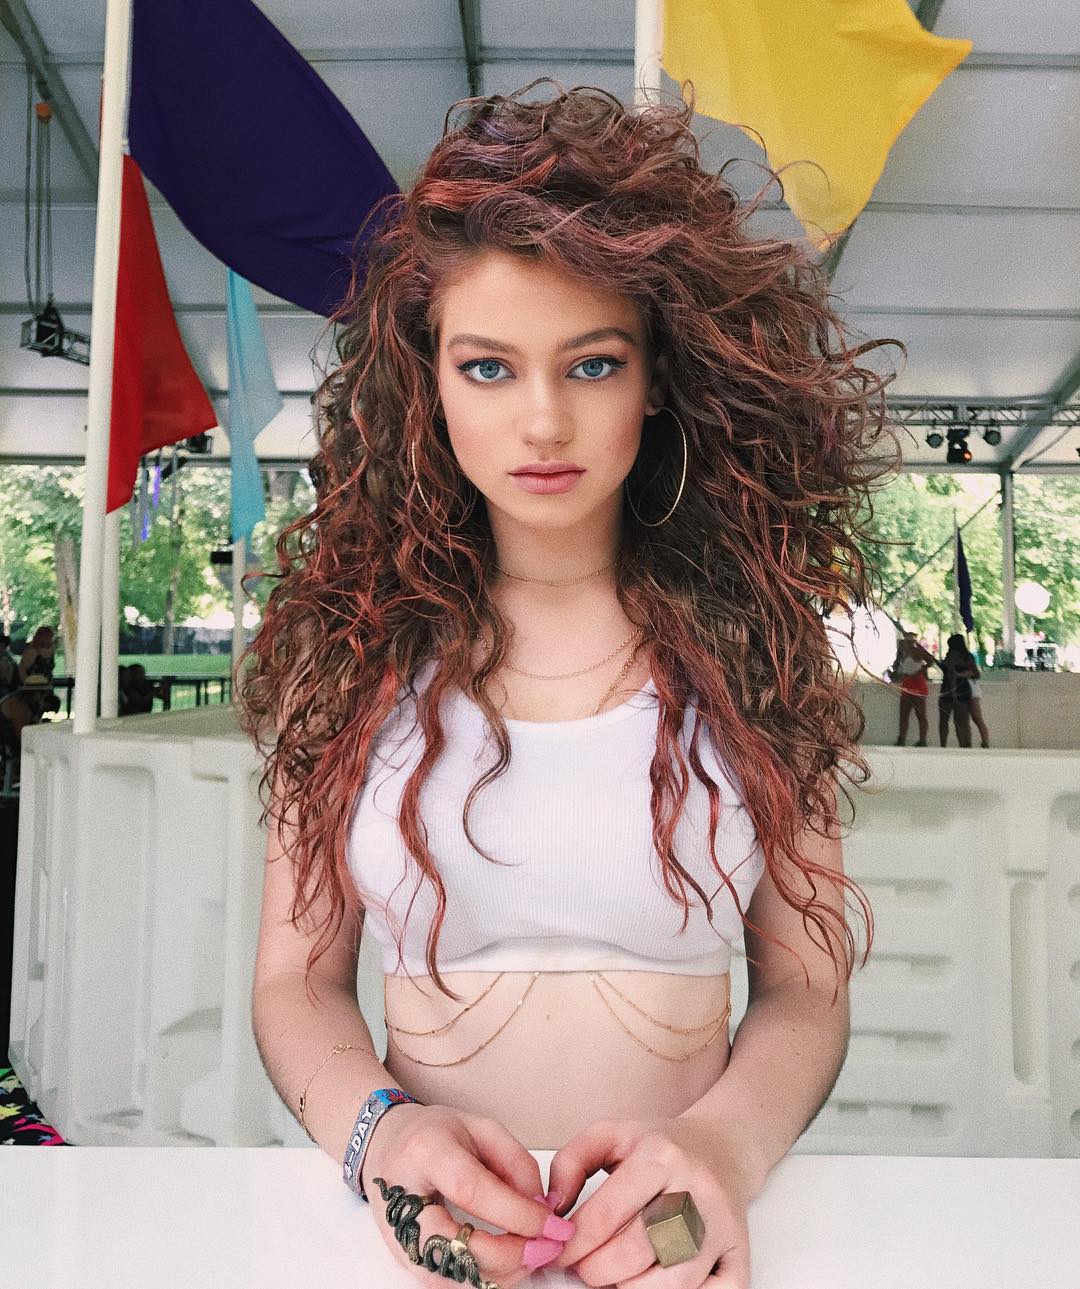 Dytto Wiki Age Real Name Boyfriend Hot Pics Dance Videos & Facts.